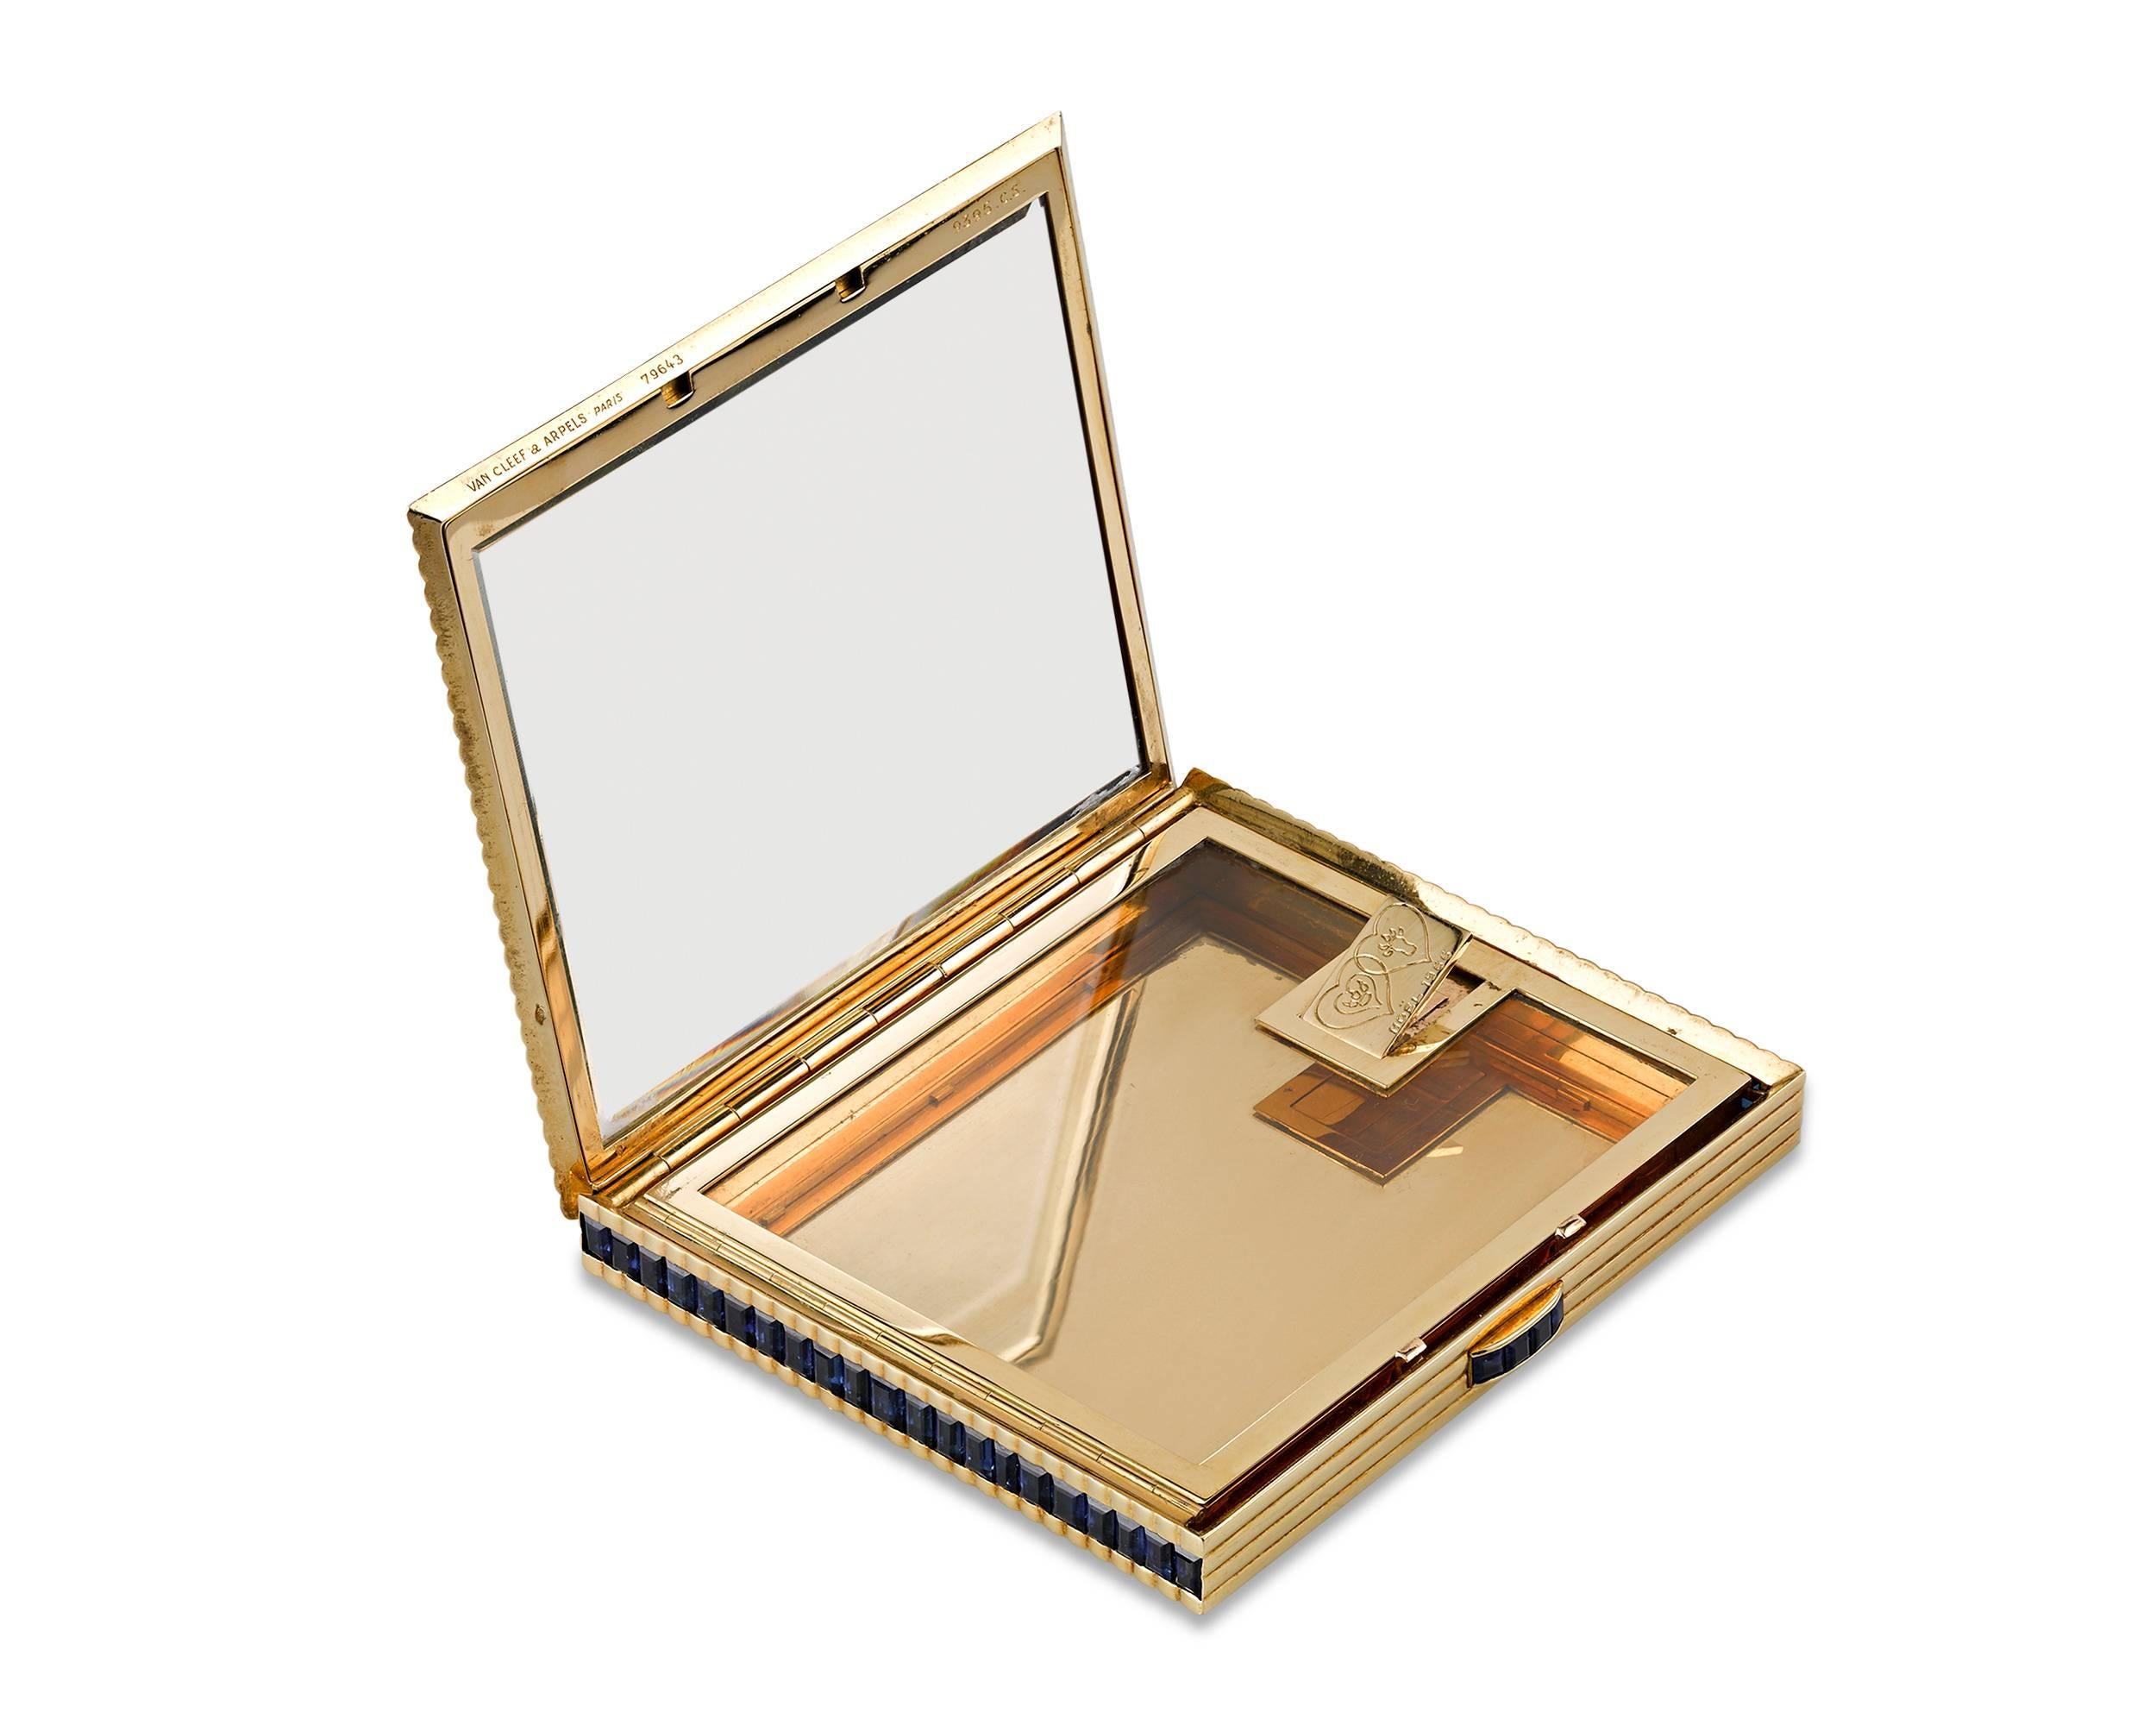 This exquisite compact was created by the famed French jewelry firm of Van Cleef & Arpels. The body of the case is crafted of 18K yellow gold, while dramatic blue sapphires accent the clasp and each side. Opening the case reveals a mirrored lid and